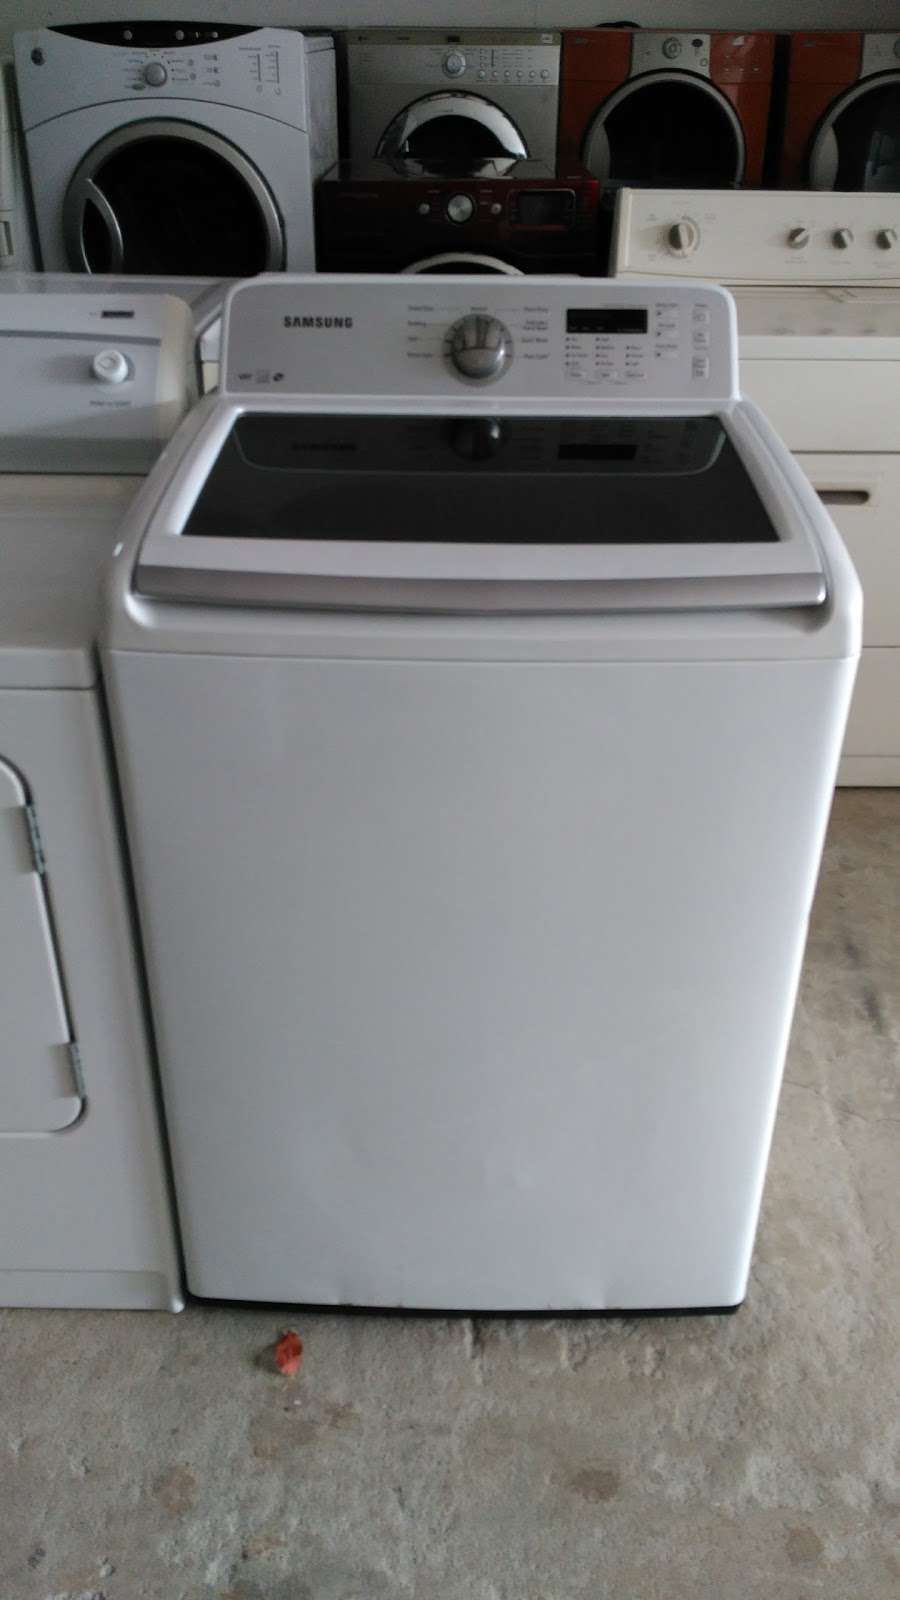 Quality Used Appliances | Photo 10 of 10 | Address: 7590 E Hwy 25, Belleview, FL 34420, USA | Phone: (352) 434-2204